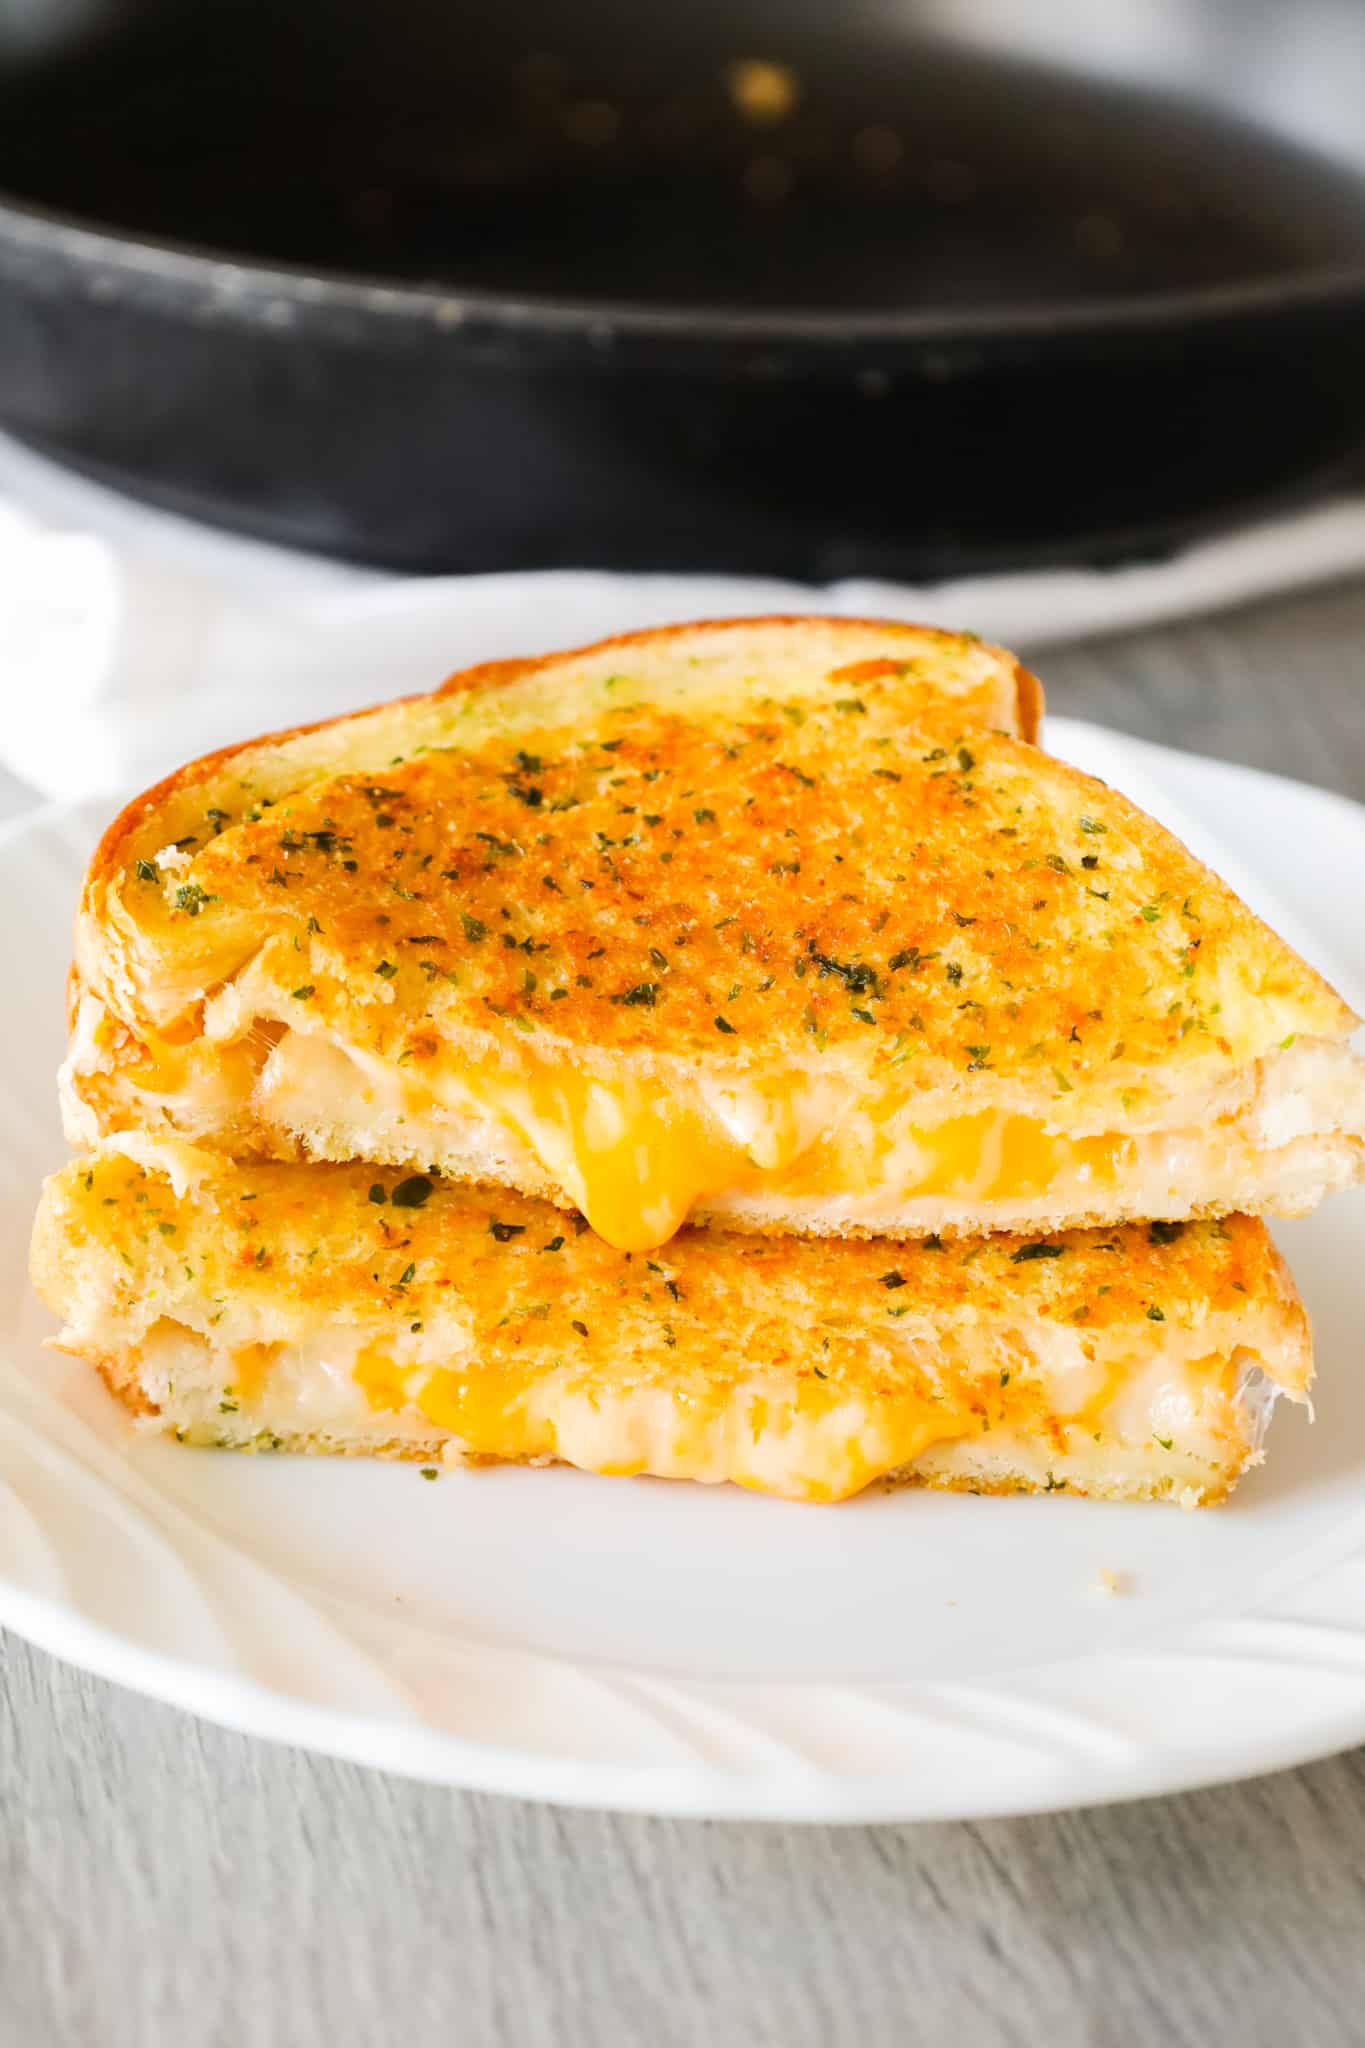 Garlic Bread Grilled Cheese is an easy lunch or dinner recipe with garlic buttered bread filled with gooey mozzarella and cheddar cheese.